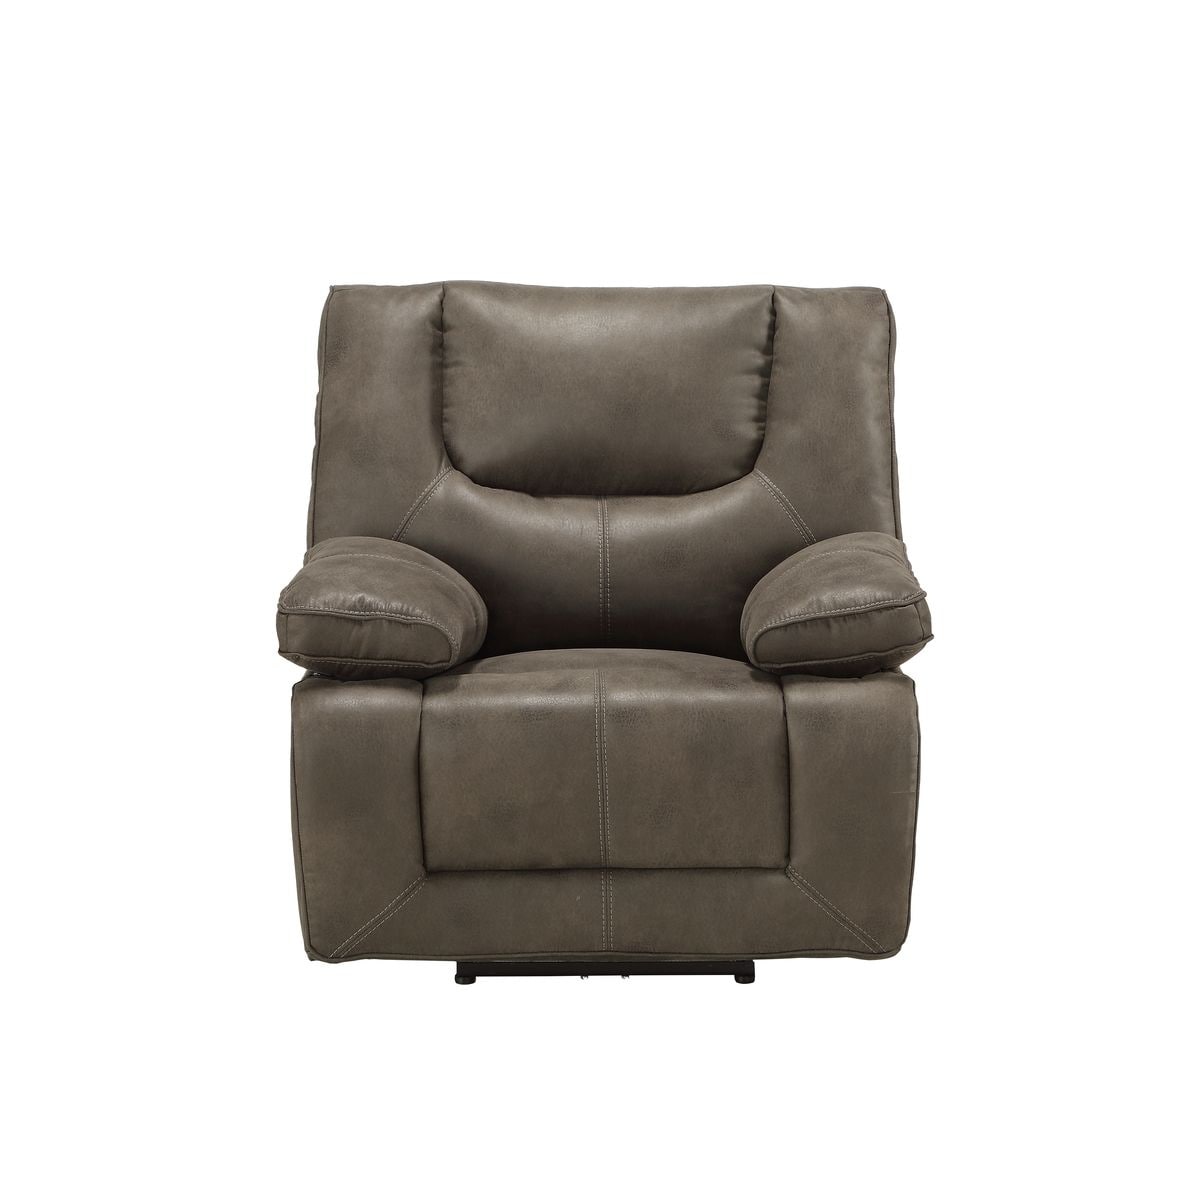 Motion Reclining Recliner Adjustable Inclination Theater Seating